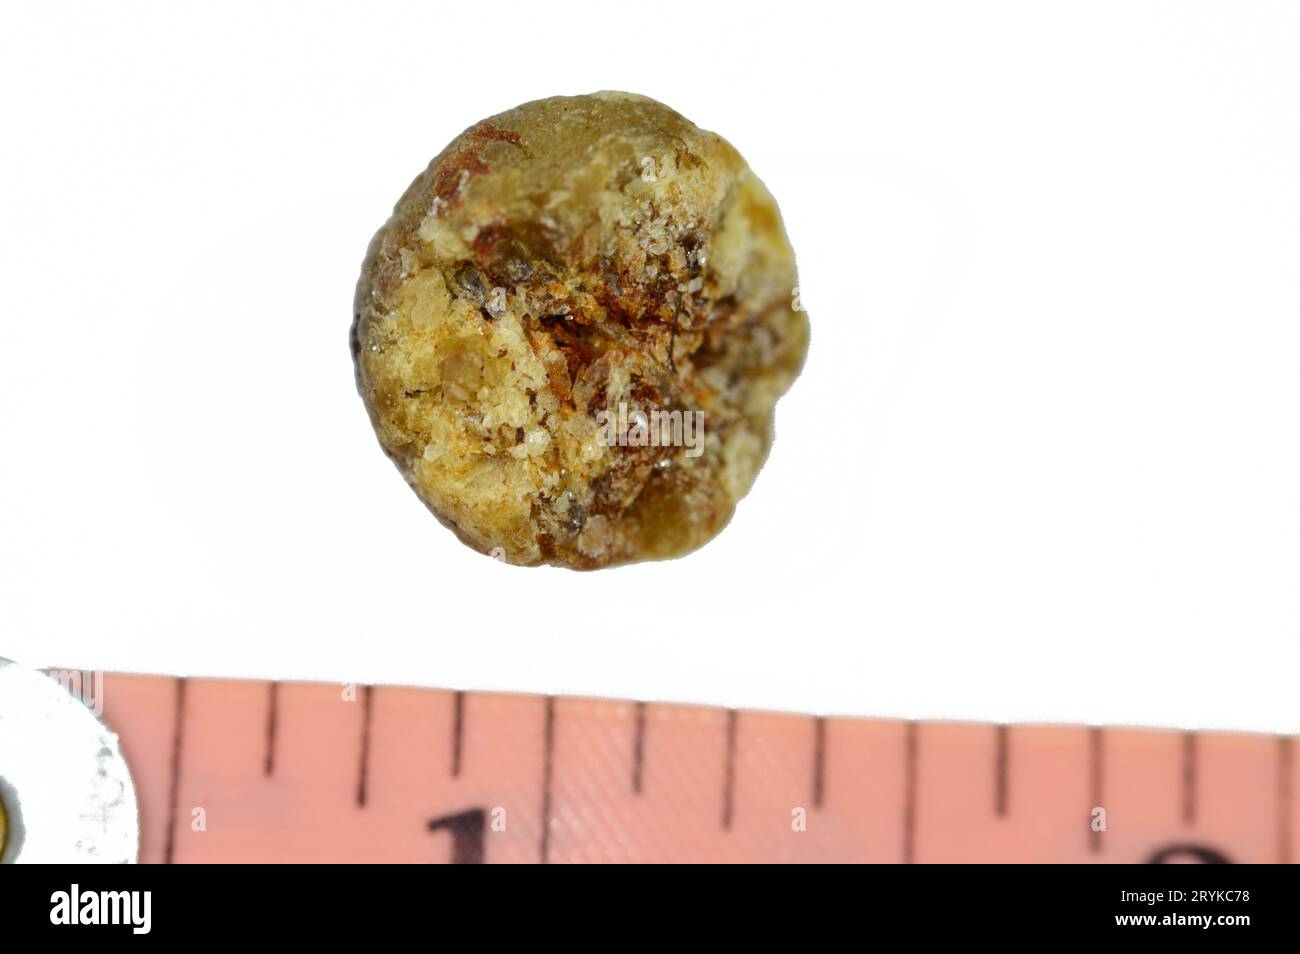 Large gallstone removed surgically after laparoscopic cholecystectomy, Gallstones are hardened deposits of digestive fluid that can form in gallbladde Stock Photo